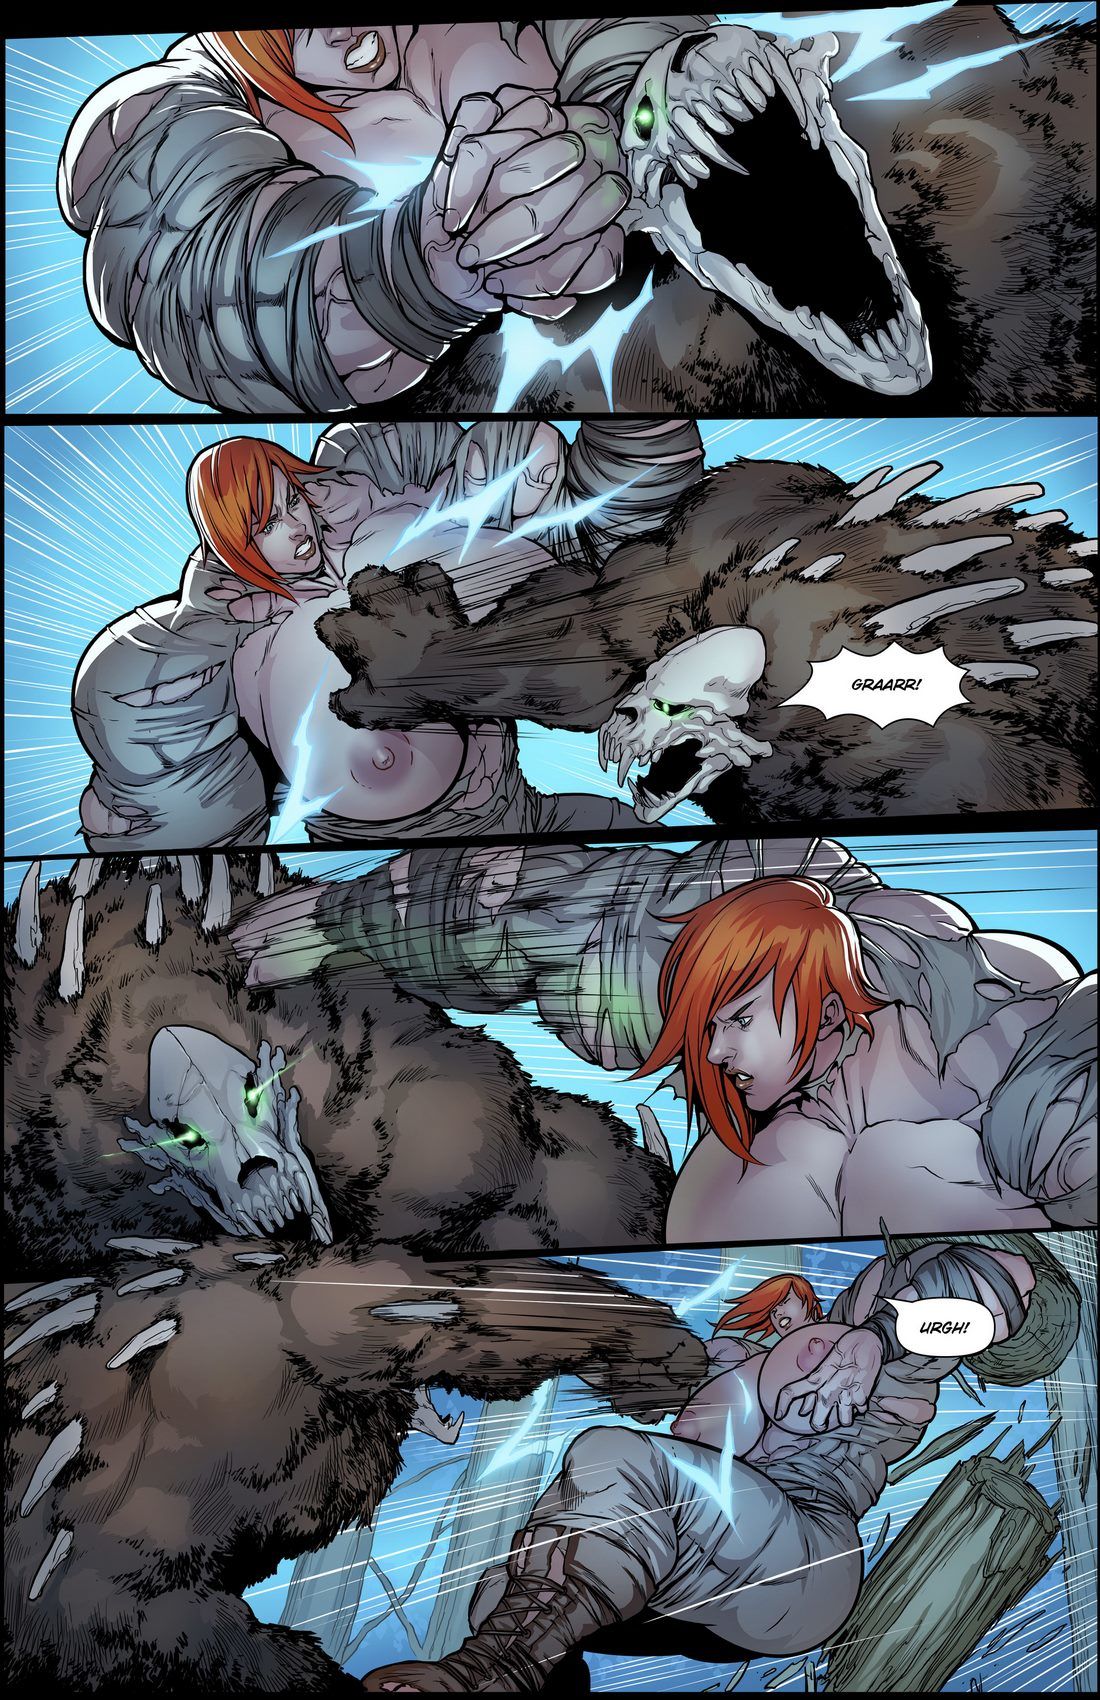 The Strong Shall Survive Issue 02 MuscleFan page 8